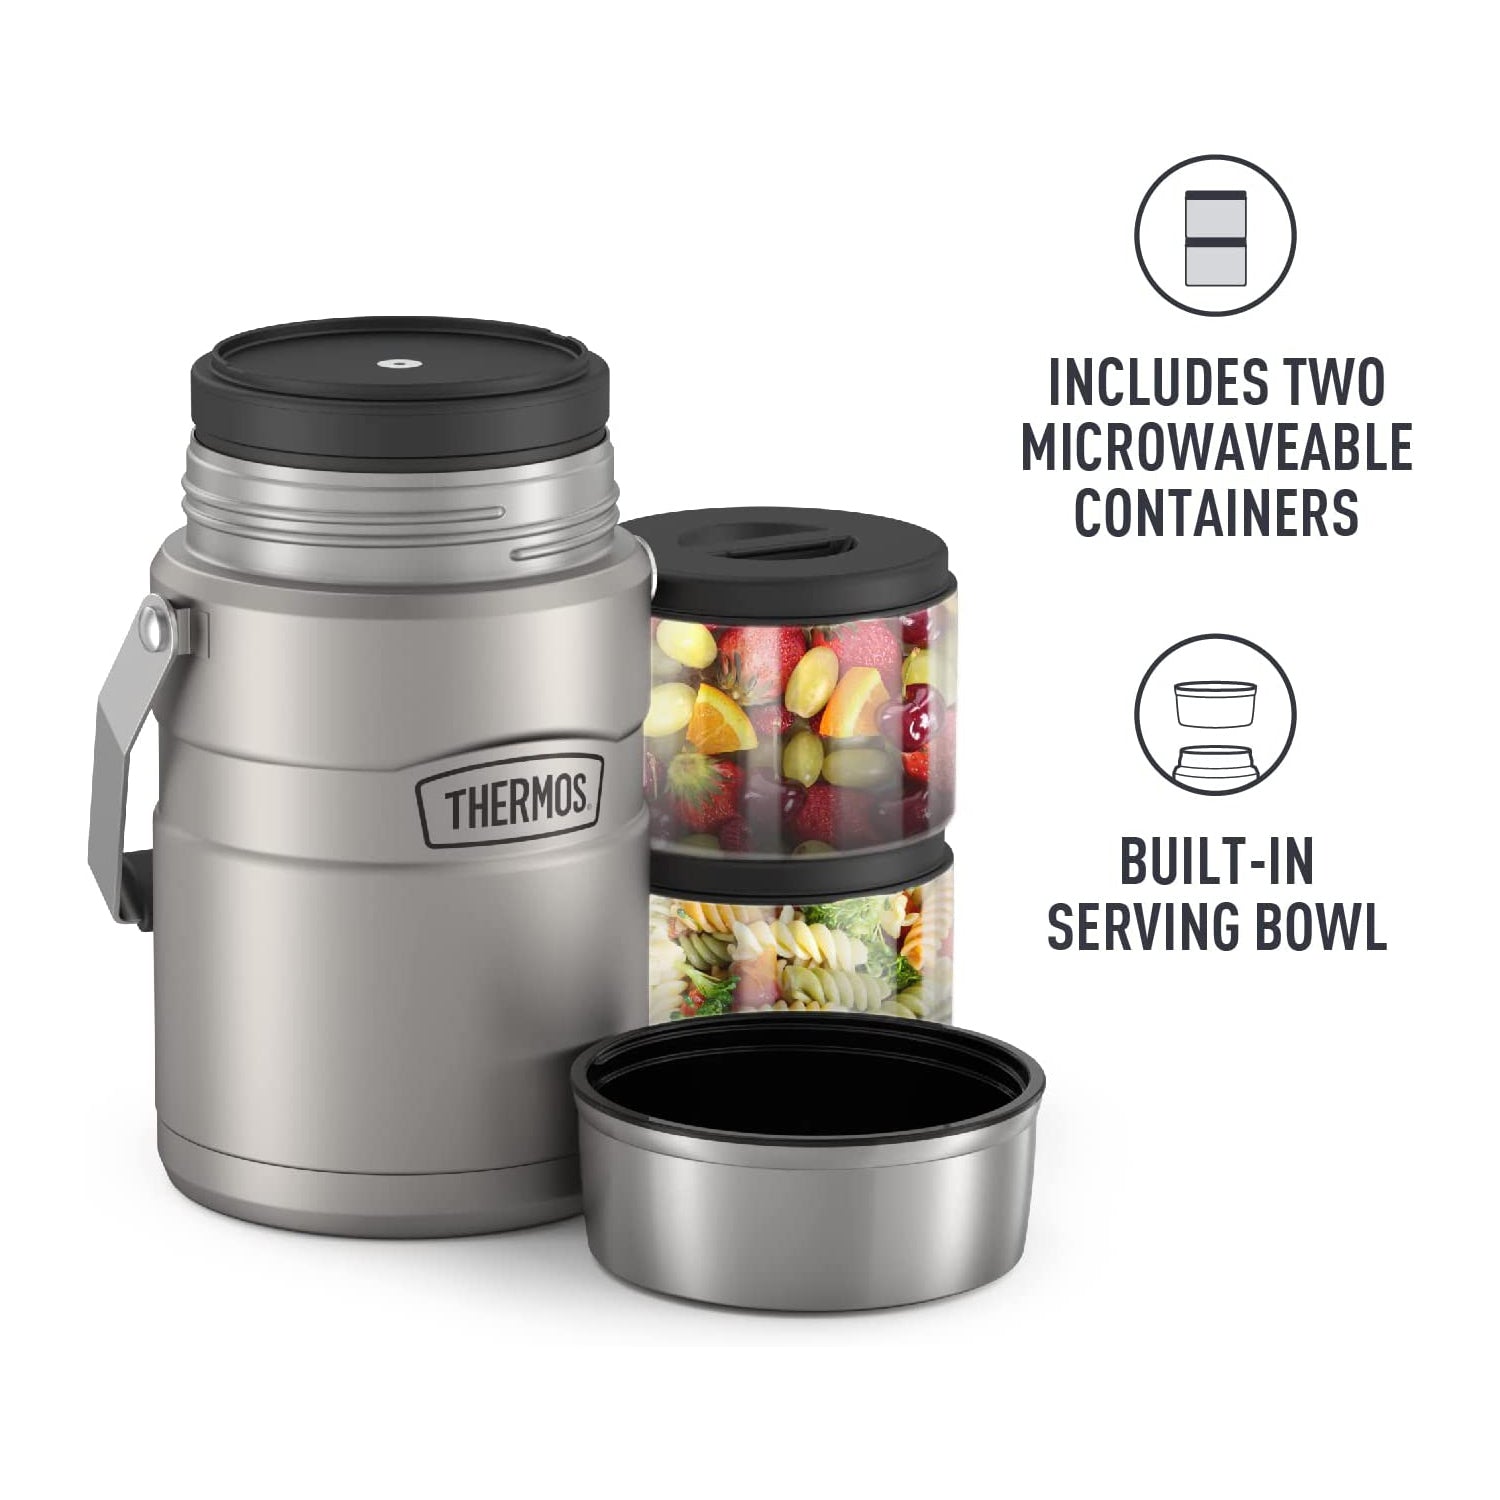 THERMOS Stainless King Big Boss Stainless Steel Food Jar - 47oz